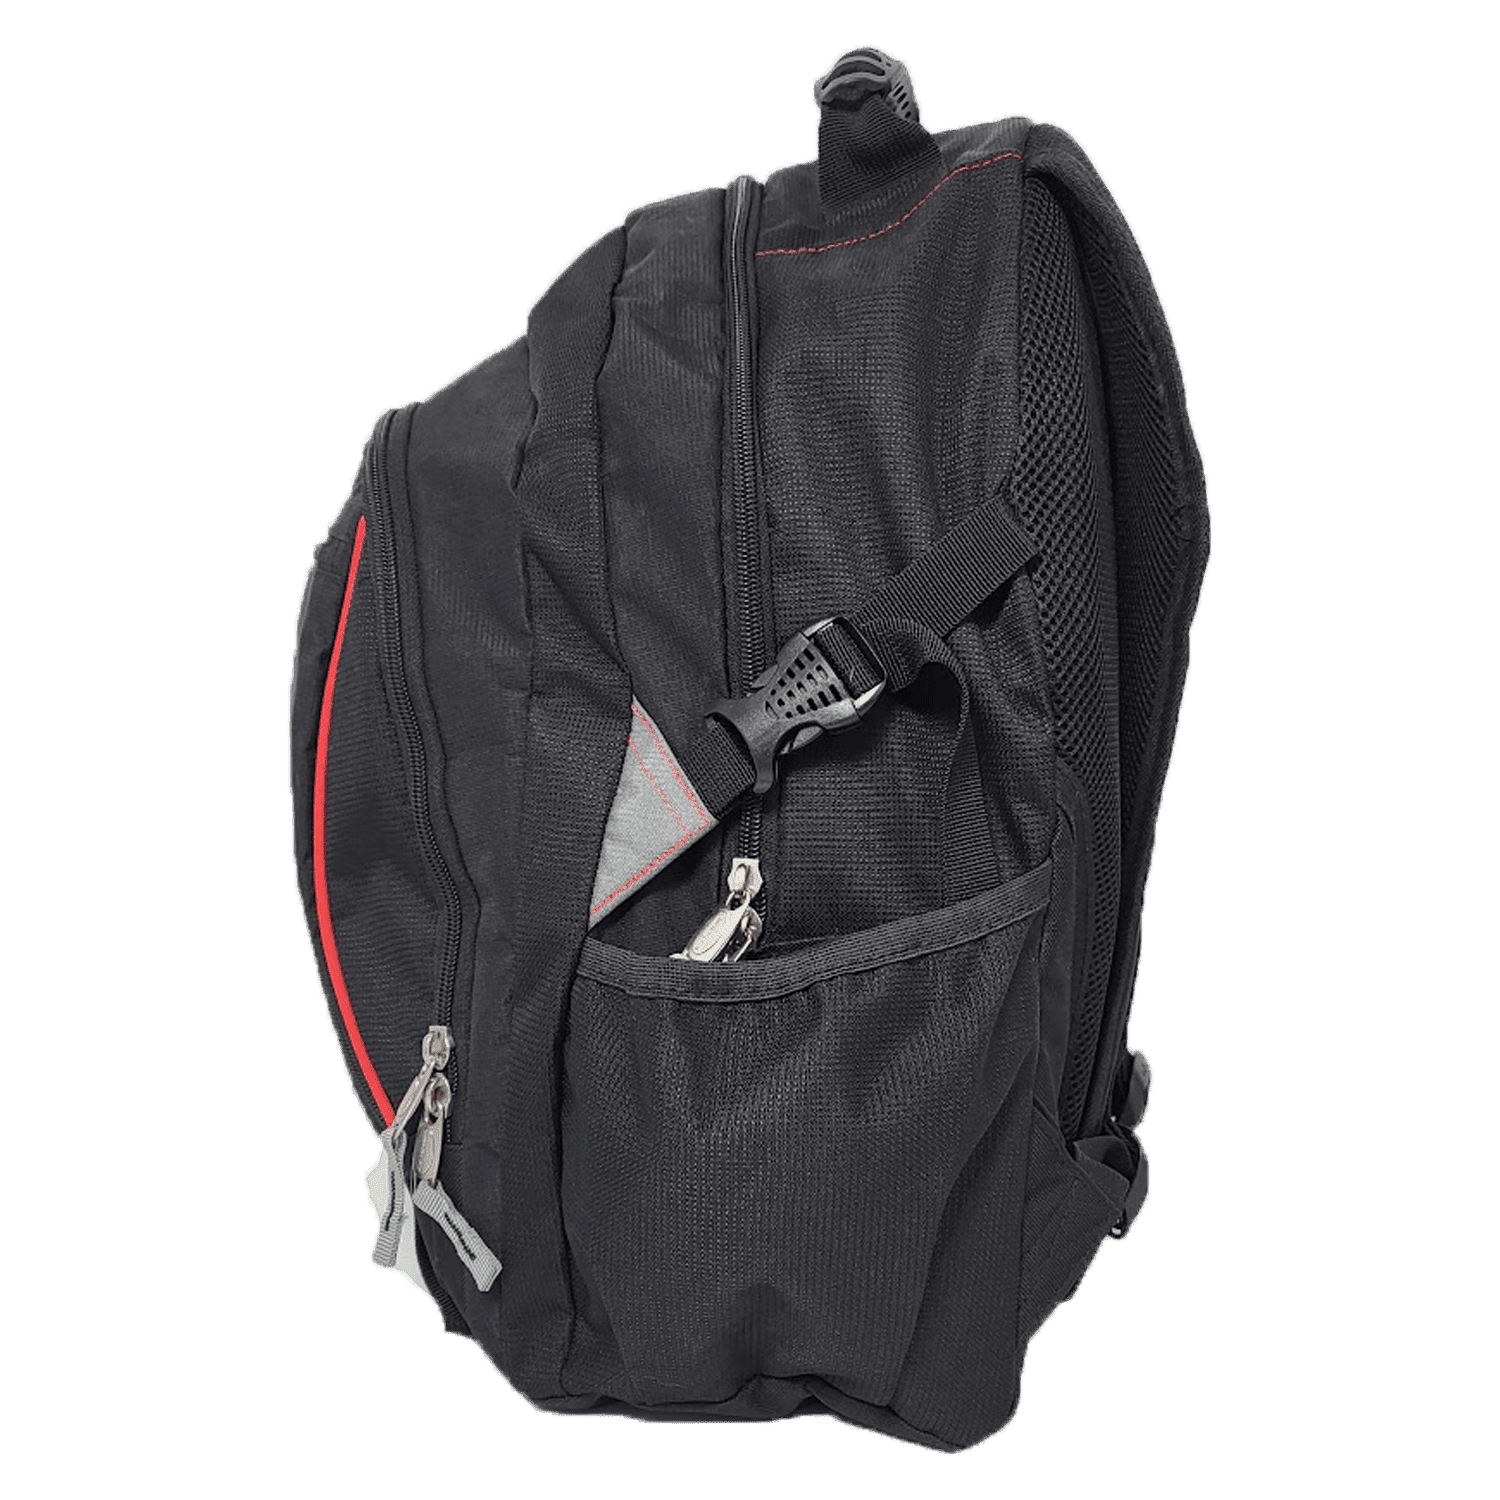 Sportech Ridge 53 – Bolton Backpack - Black/Red 3 Shaws Department Stores